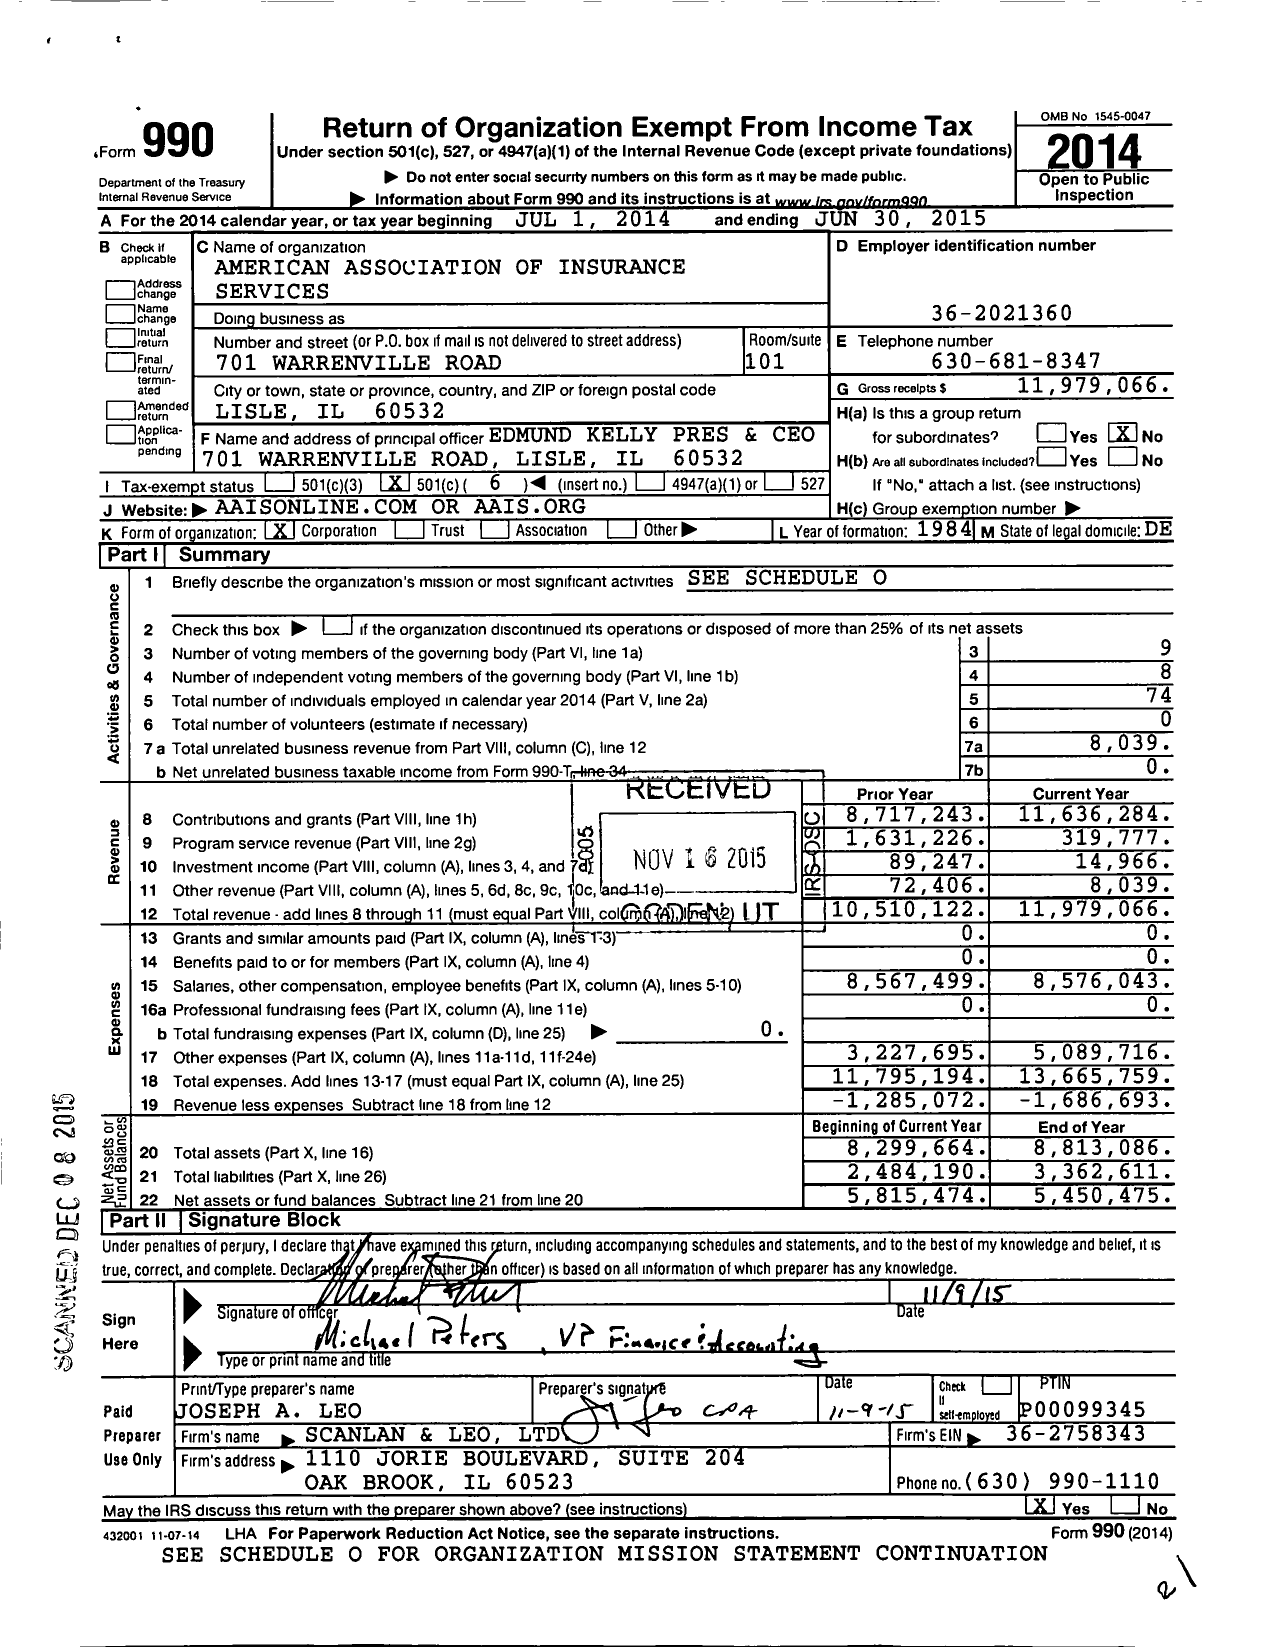 Image of first page of 2014 Form 990O for American Association of Insurance Services